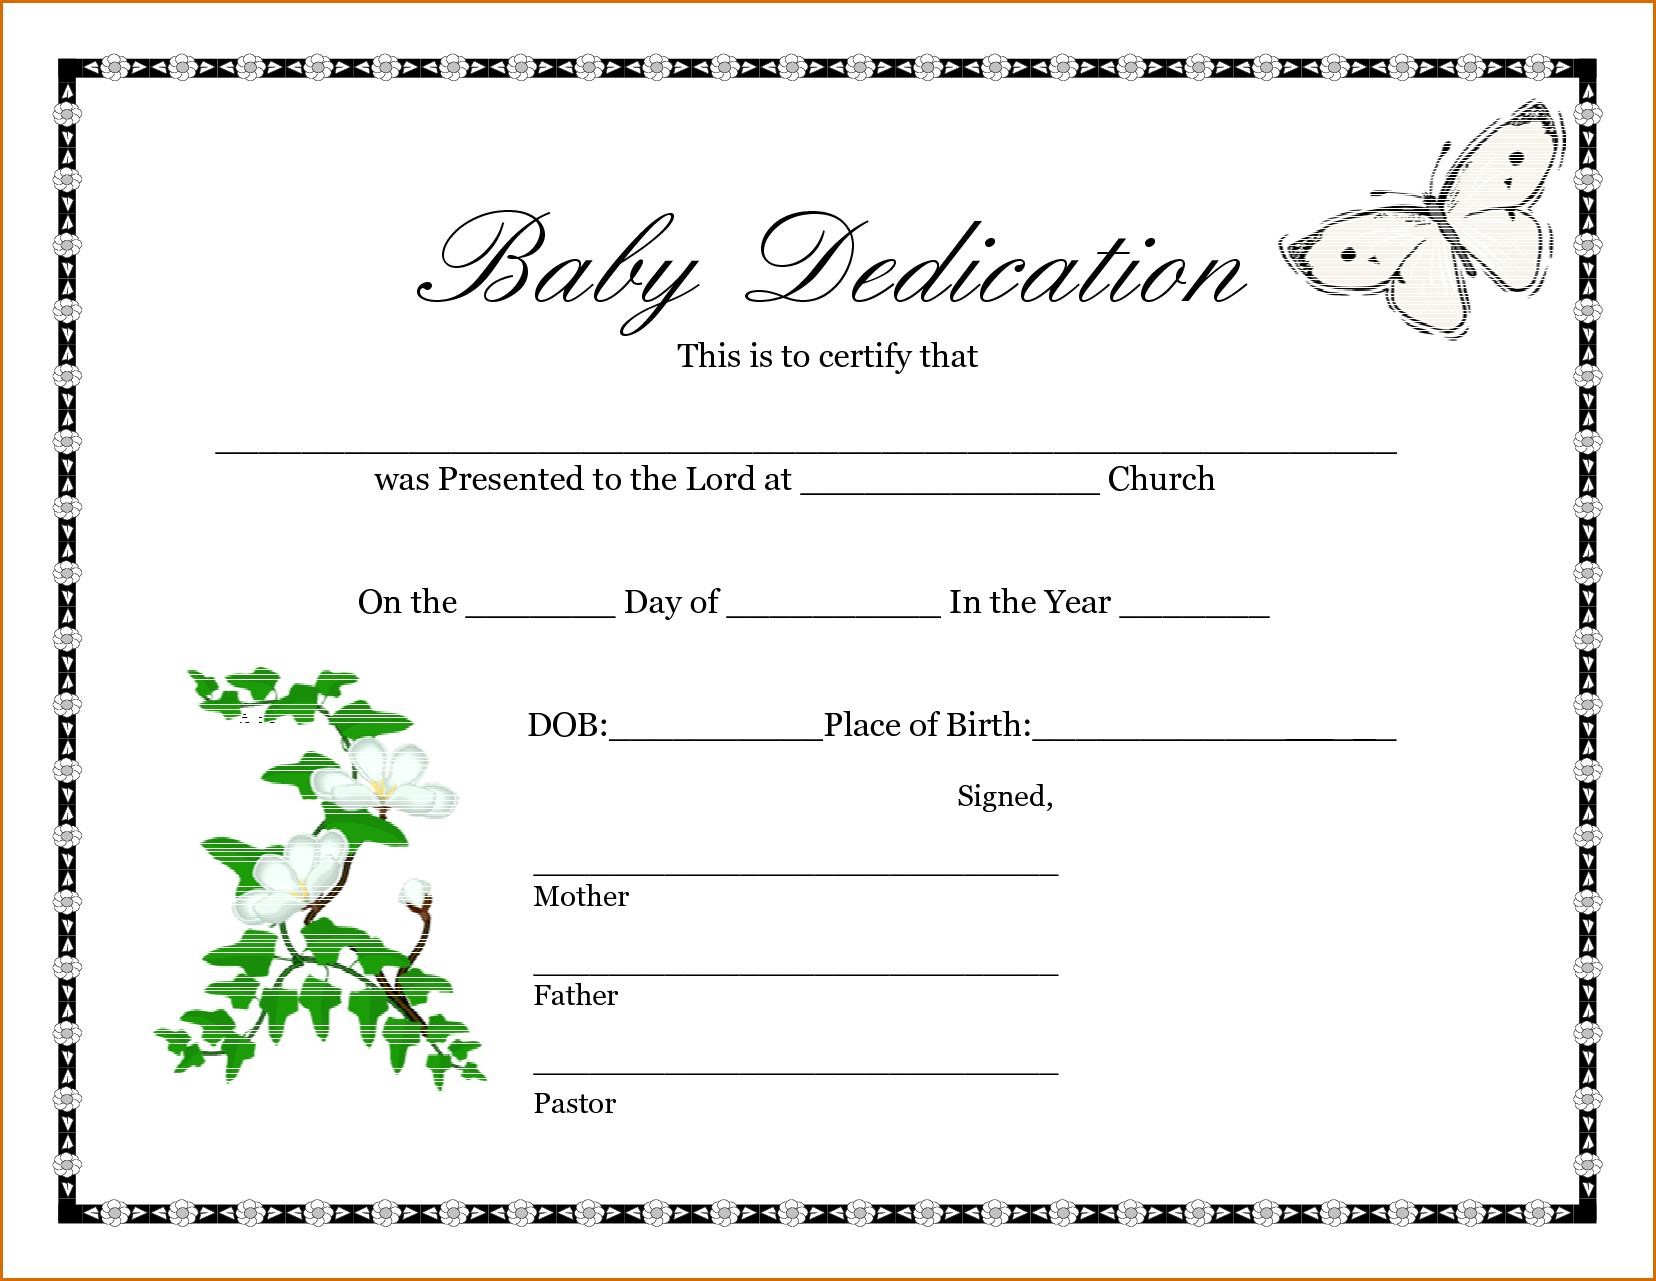 Certificates. Breathtaking Birth Certificate Template Pertaining To Editable Birth Certificate Template